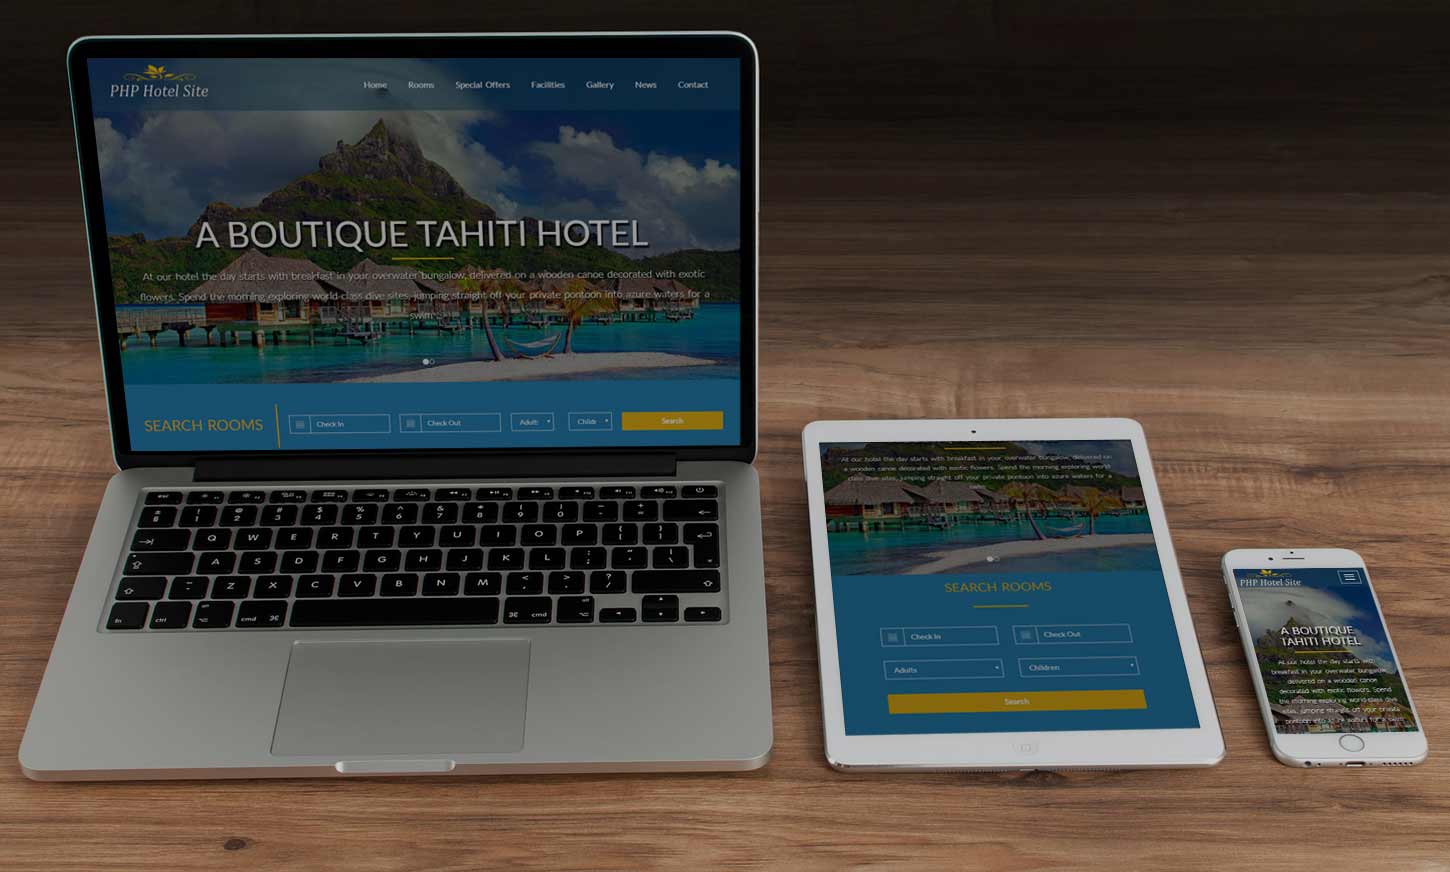  The new version 2.0 of PHP Hotel Site is now available